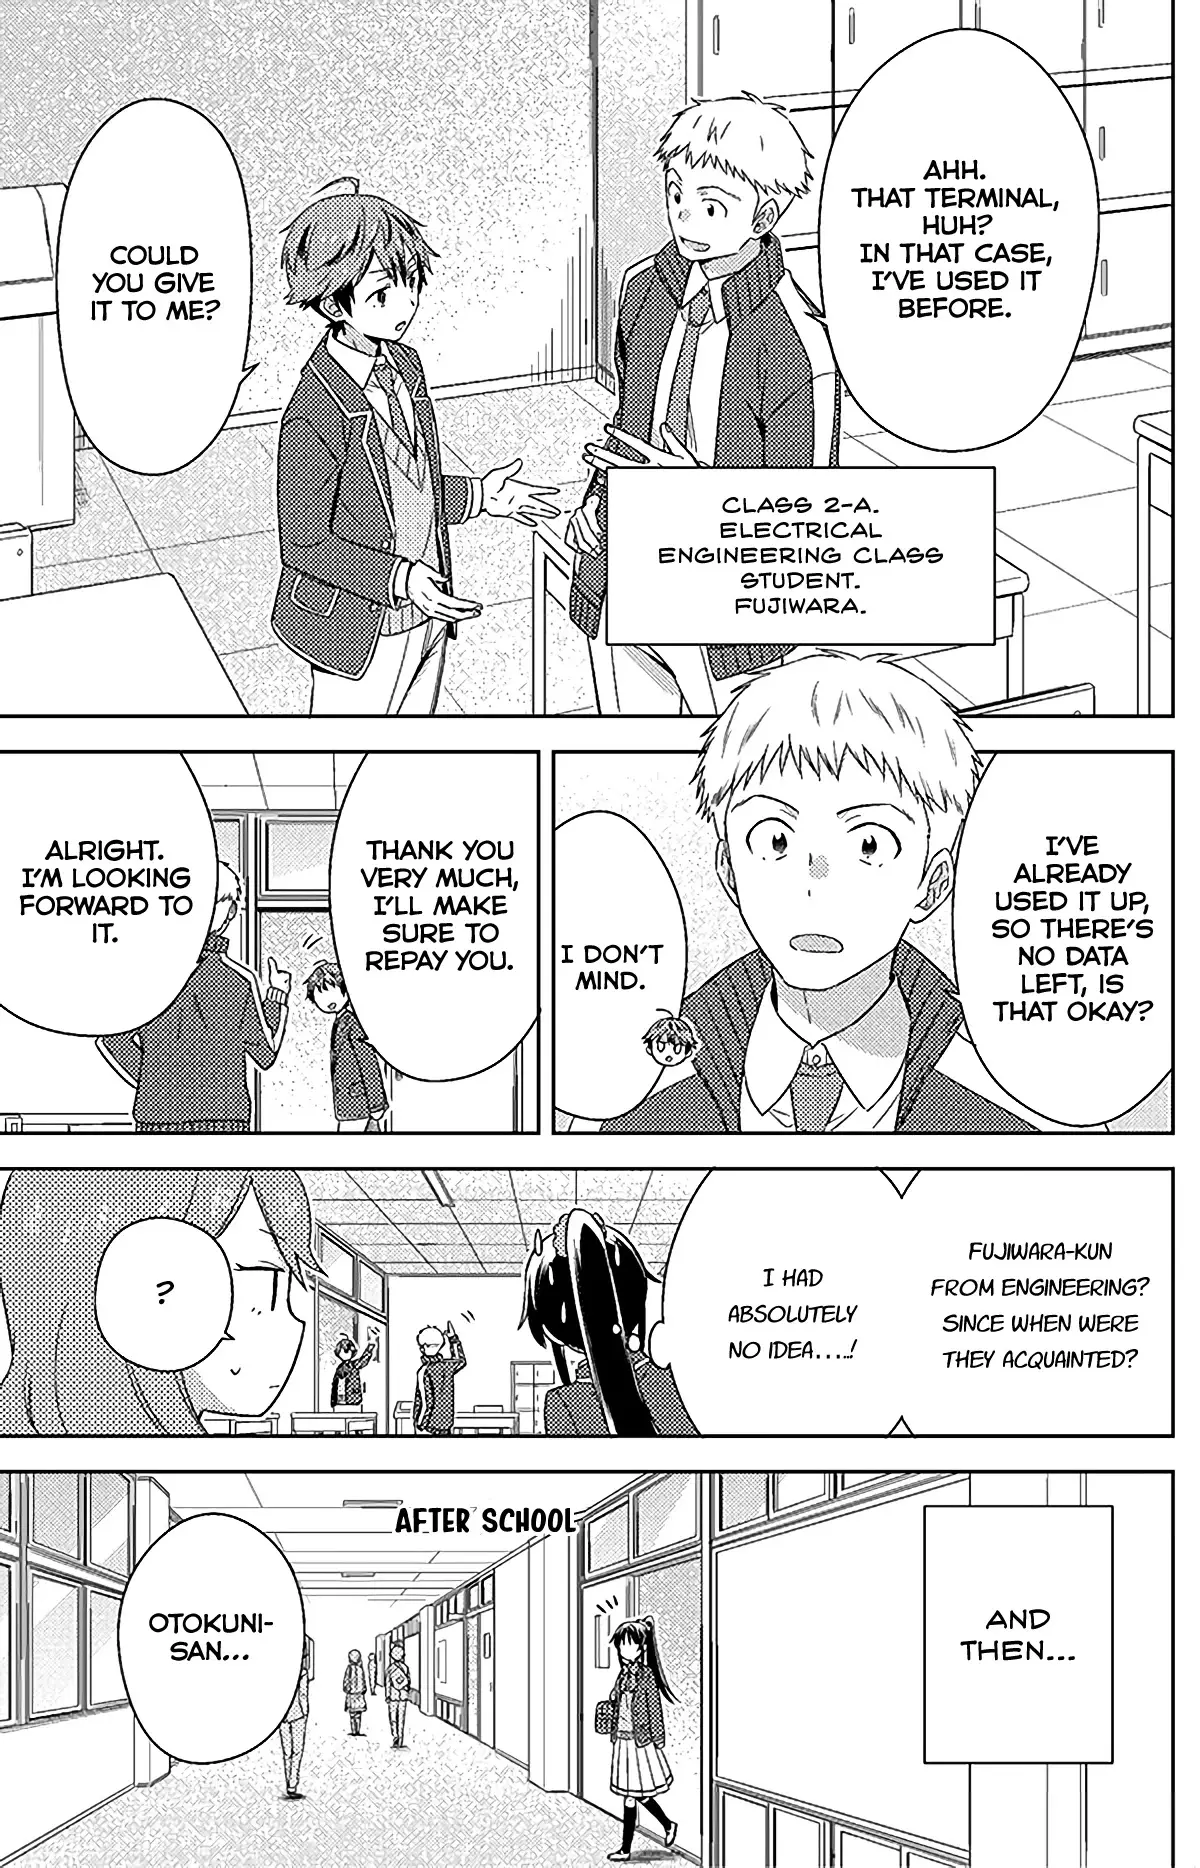 Detective-Kun, You're So Reliable! - 6 page 6